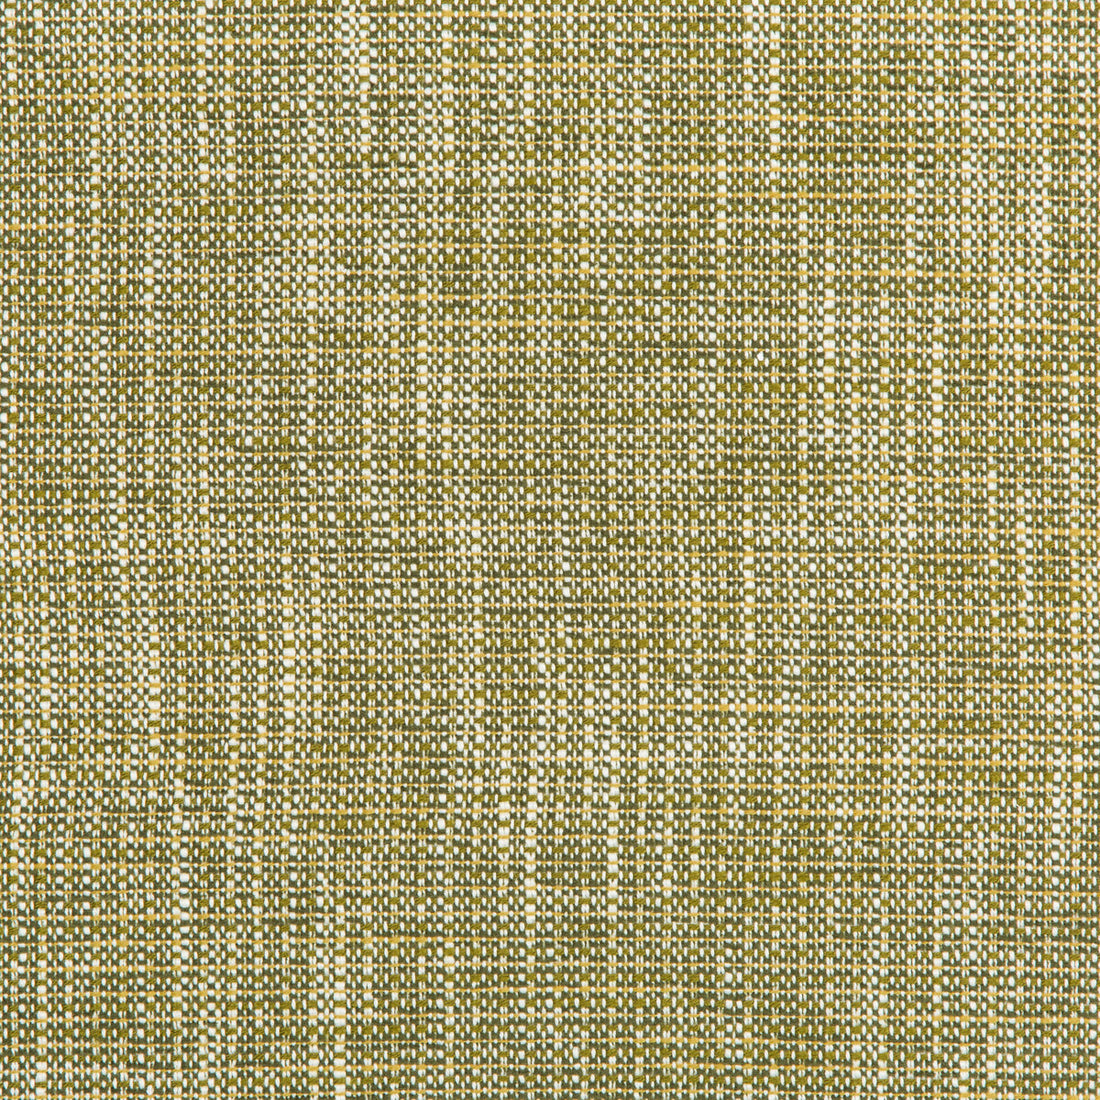 River Park fabric in meadow color - pattern 35866.314.0 - by Kravet Contract in the Gis Crypton collection